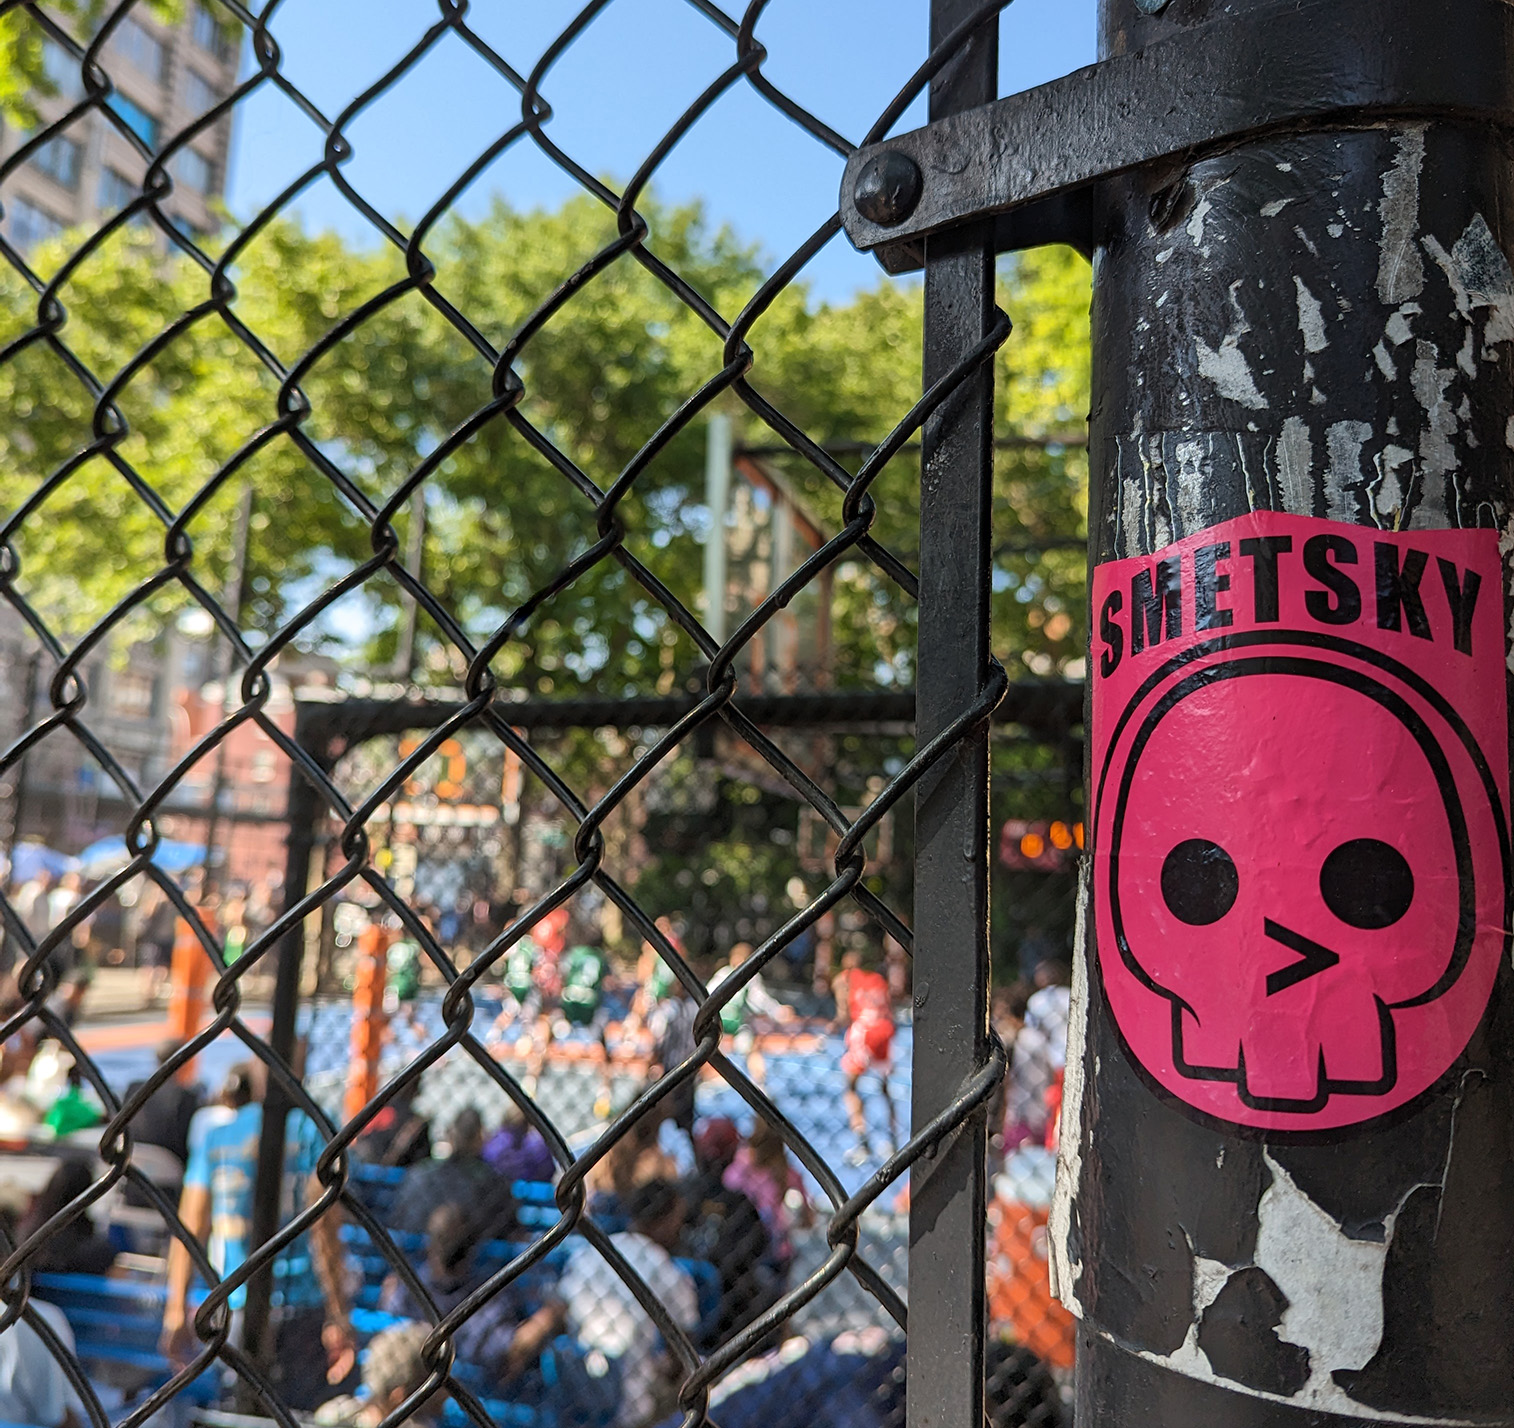 A black link fence in the foreground, with a pink sticker of a skull symbol. The sticker says Smetsky. In the background, a group of players in red and green uniforms playing basketball. An audience is watching.
